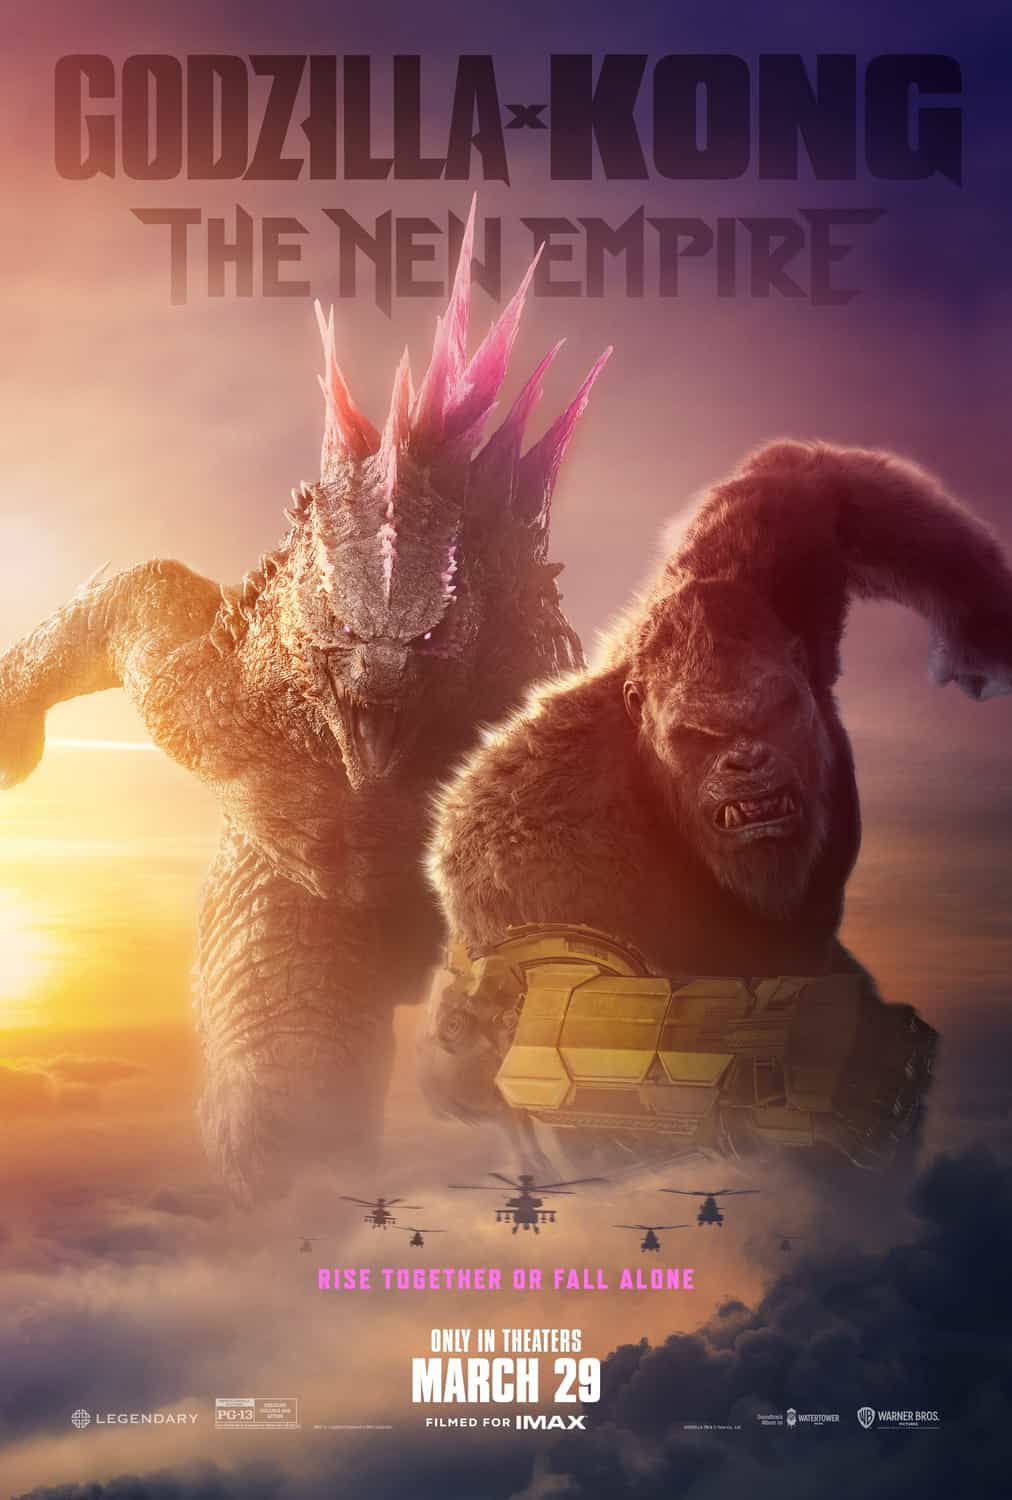 This weeks North American new movie preview 29th March 2024 - Godzilla x Kong: The New Empire, Black Flies, Miracle In East Texas, Winnie-The-Pooh: Blood and Honey 2, The Beautiful Game, In the Land of Saints and Sinners, The Oath and The Listener